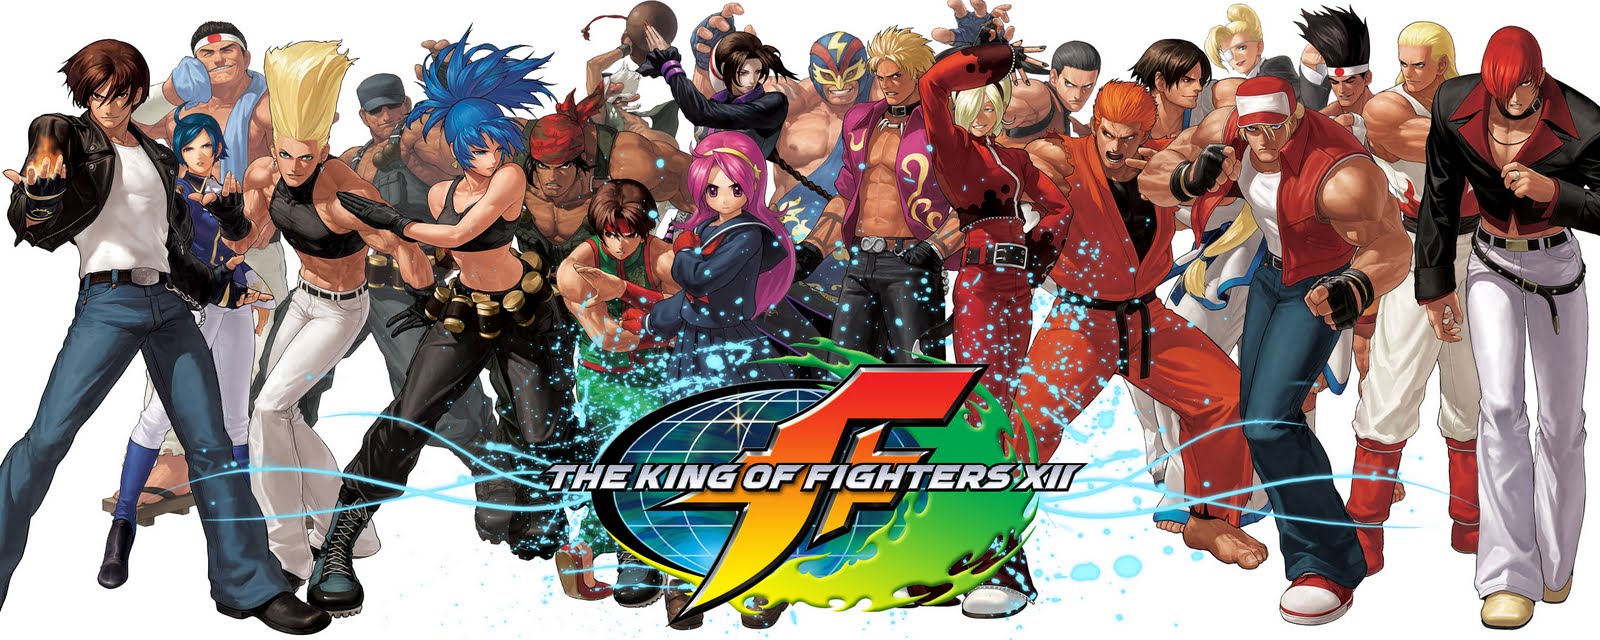 the king of fighters wallpaper,hero,street dance,fictional character,animation,anime